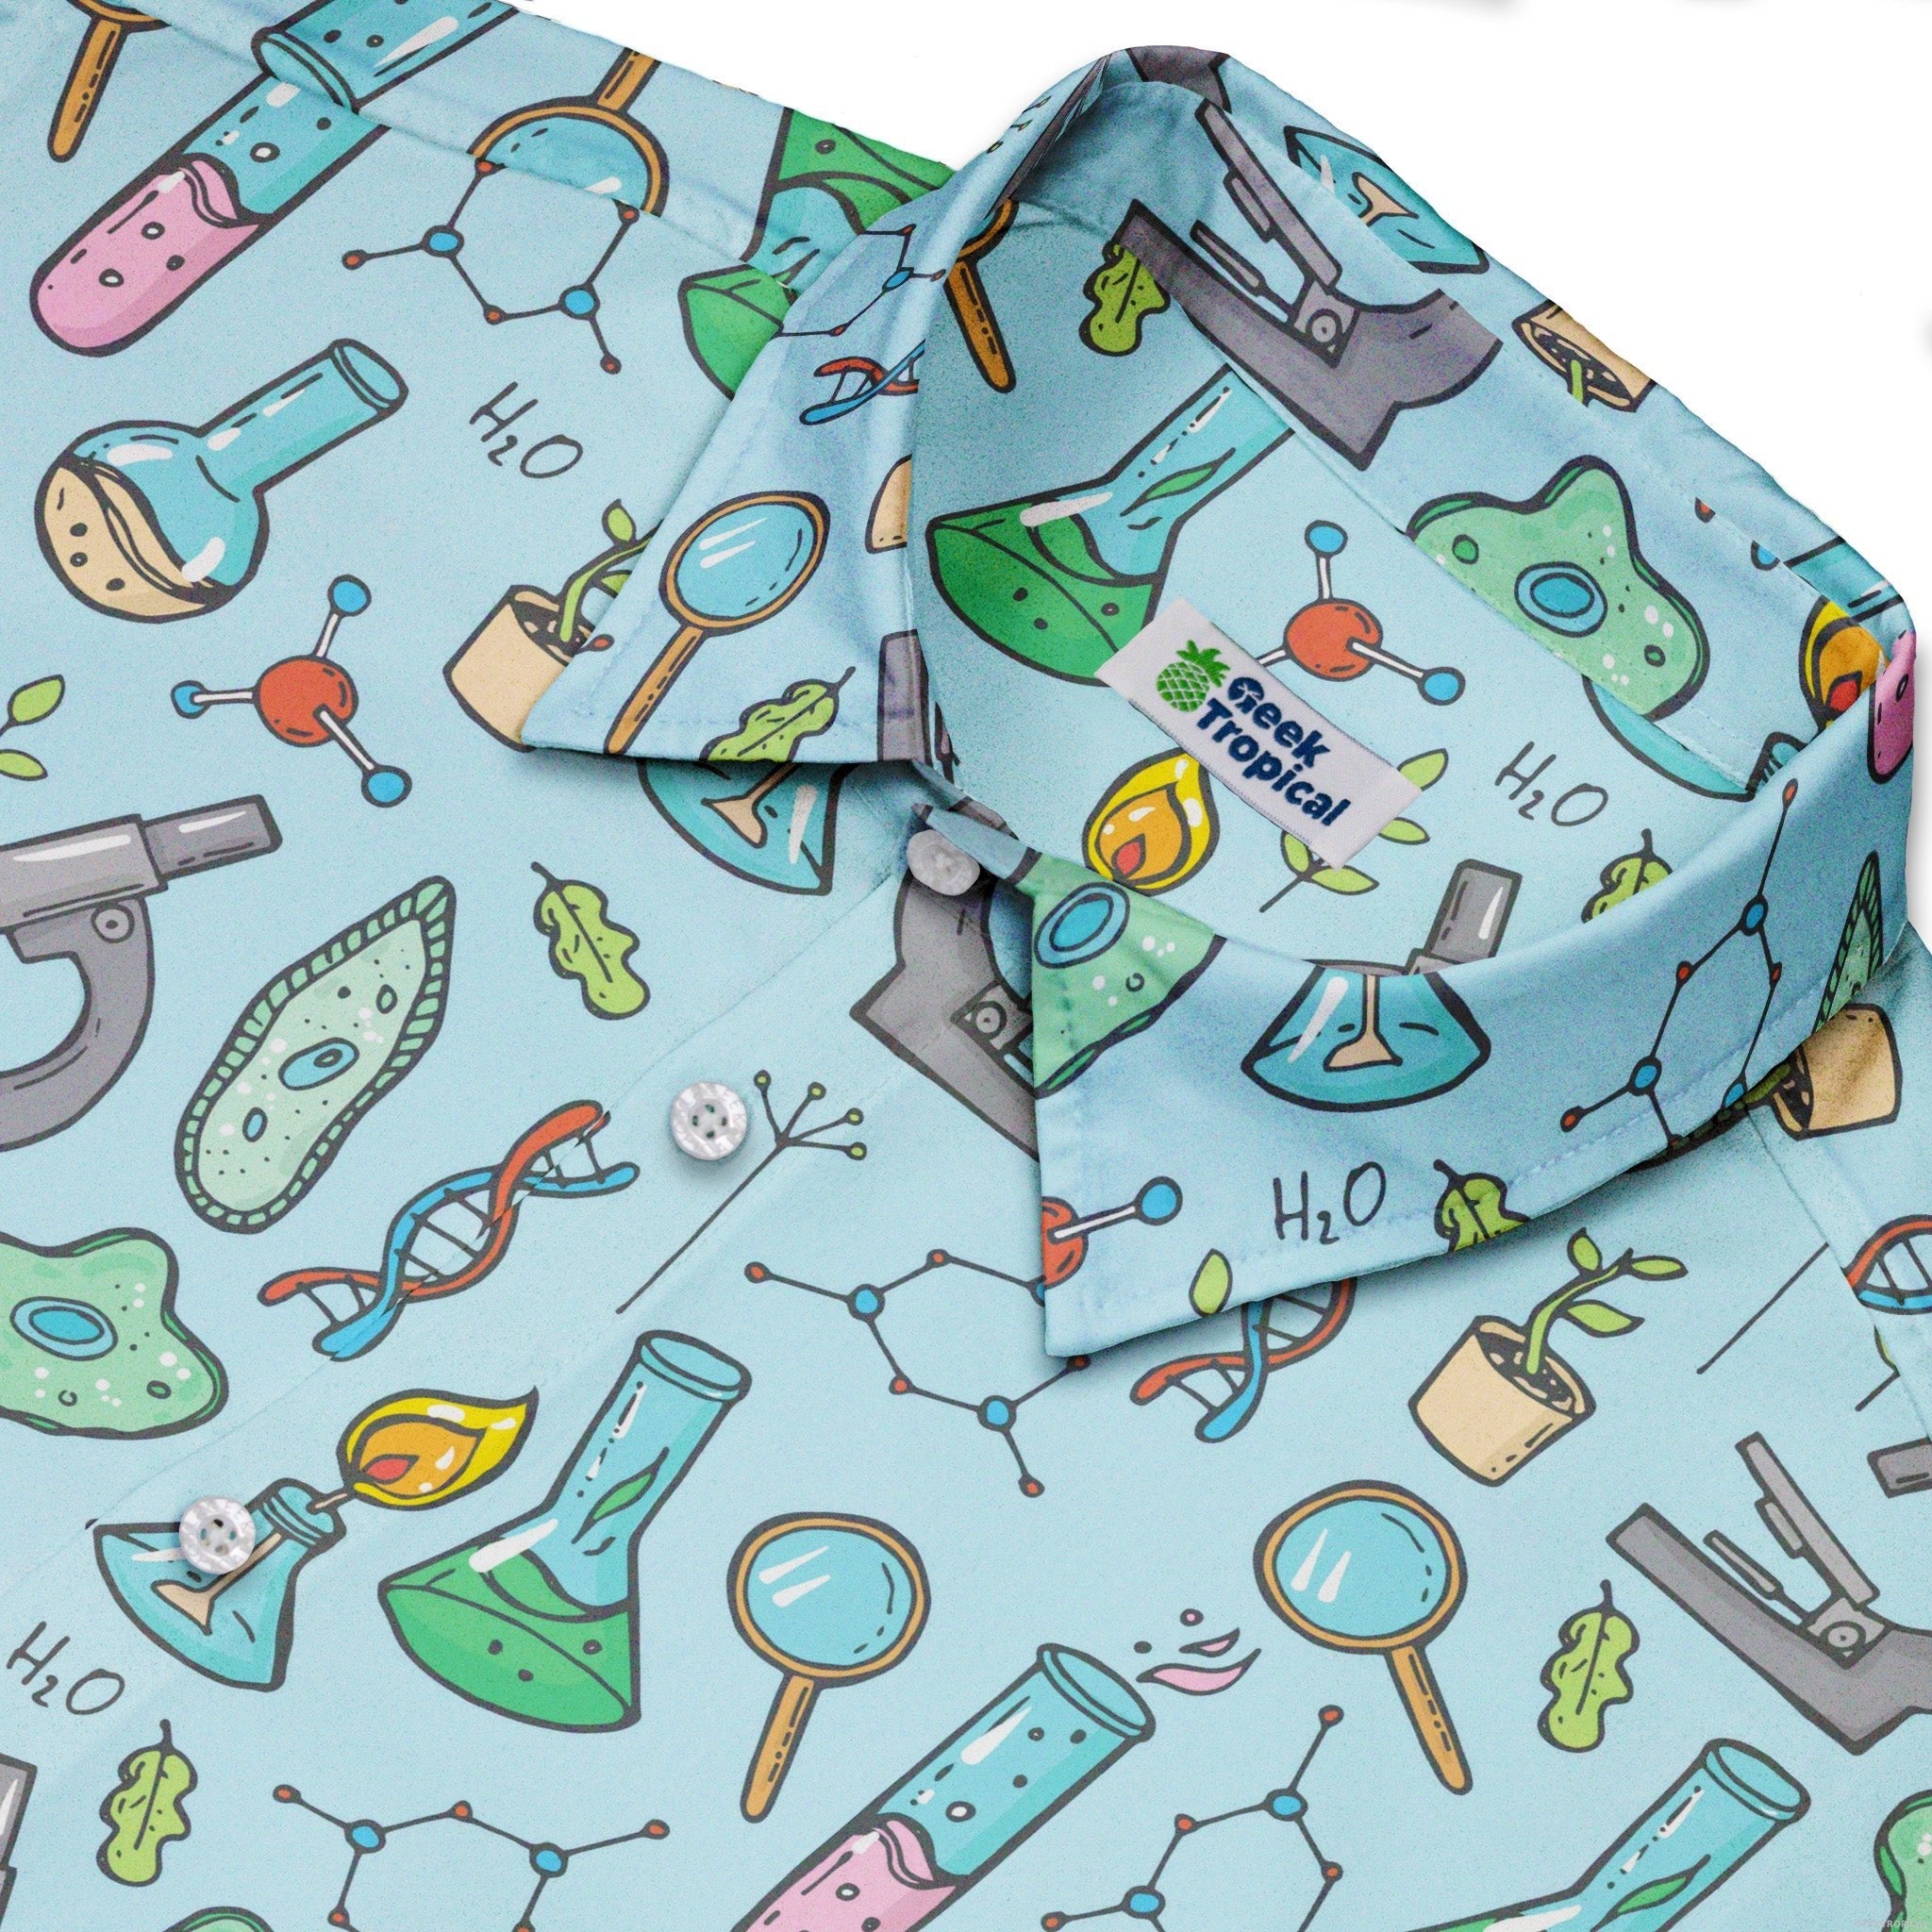 Science Bioengineer Germanation Sky Blue Button Up Shirt - adult sizing - science print -